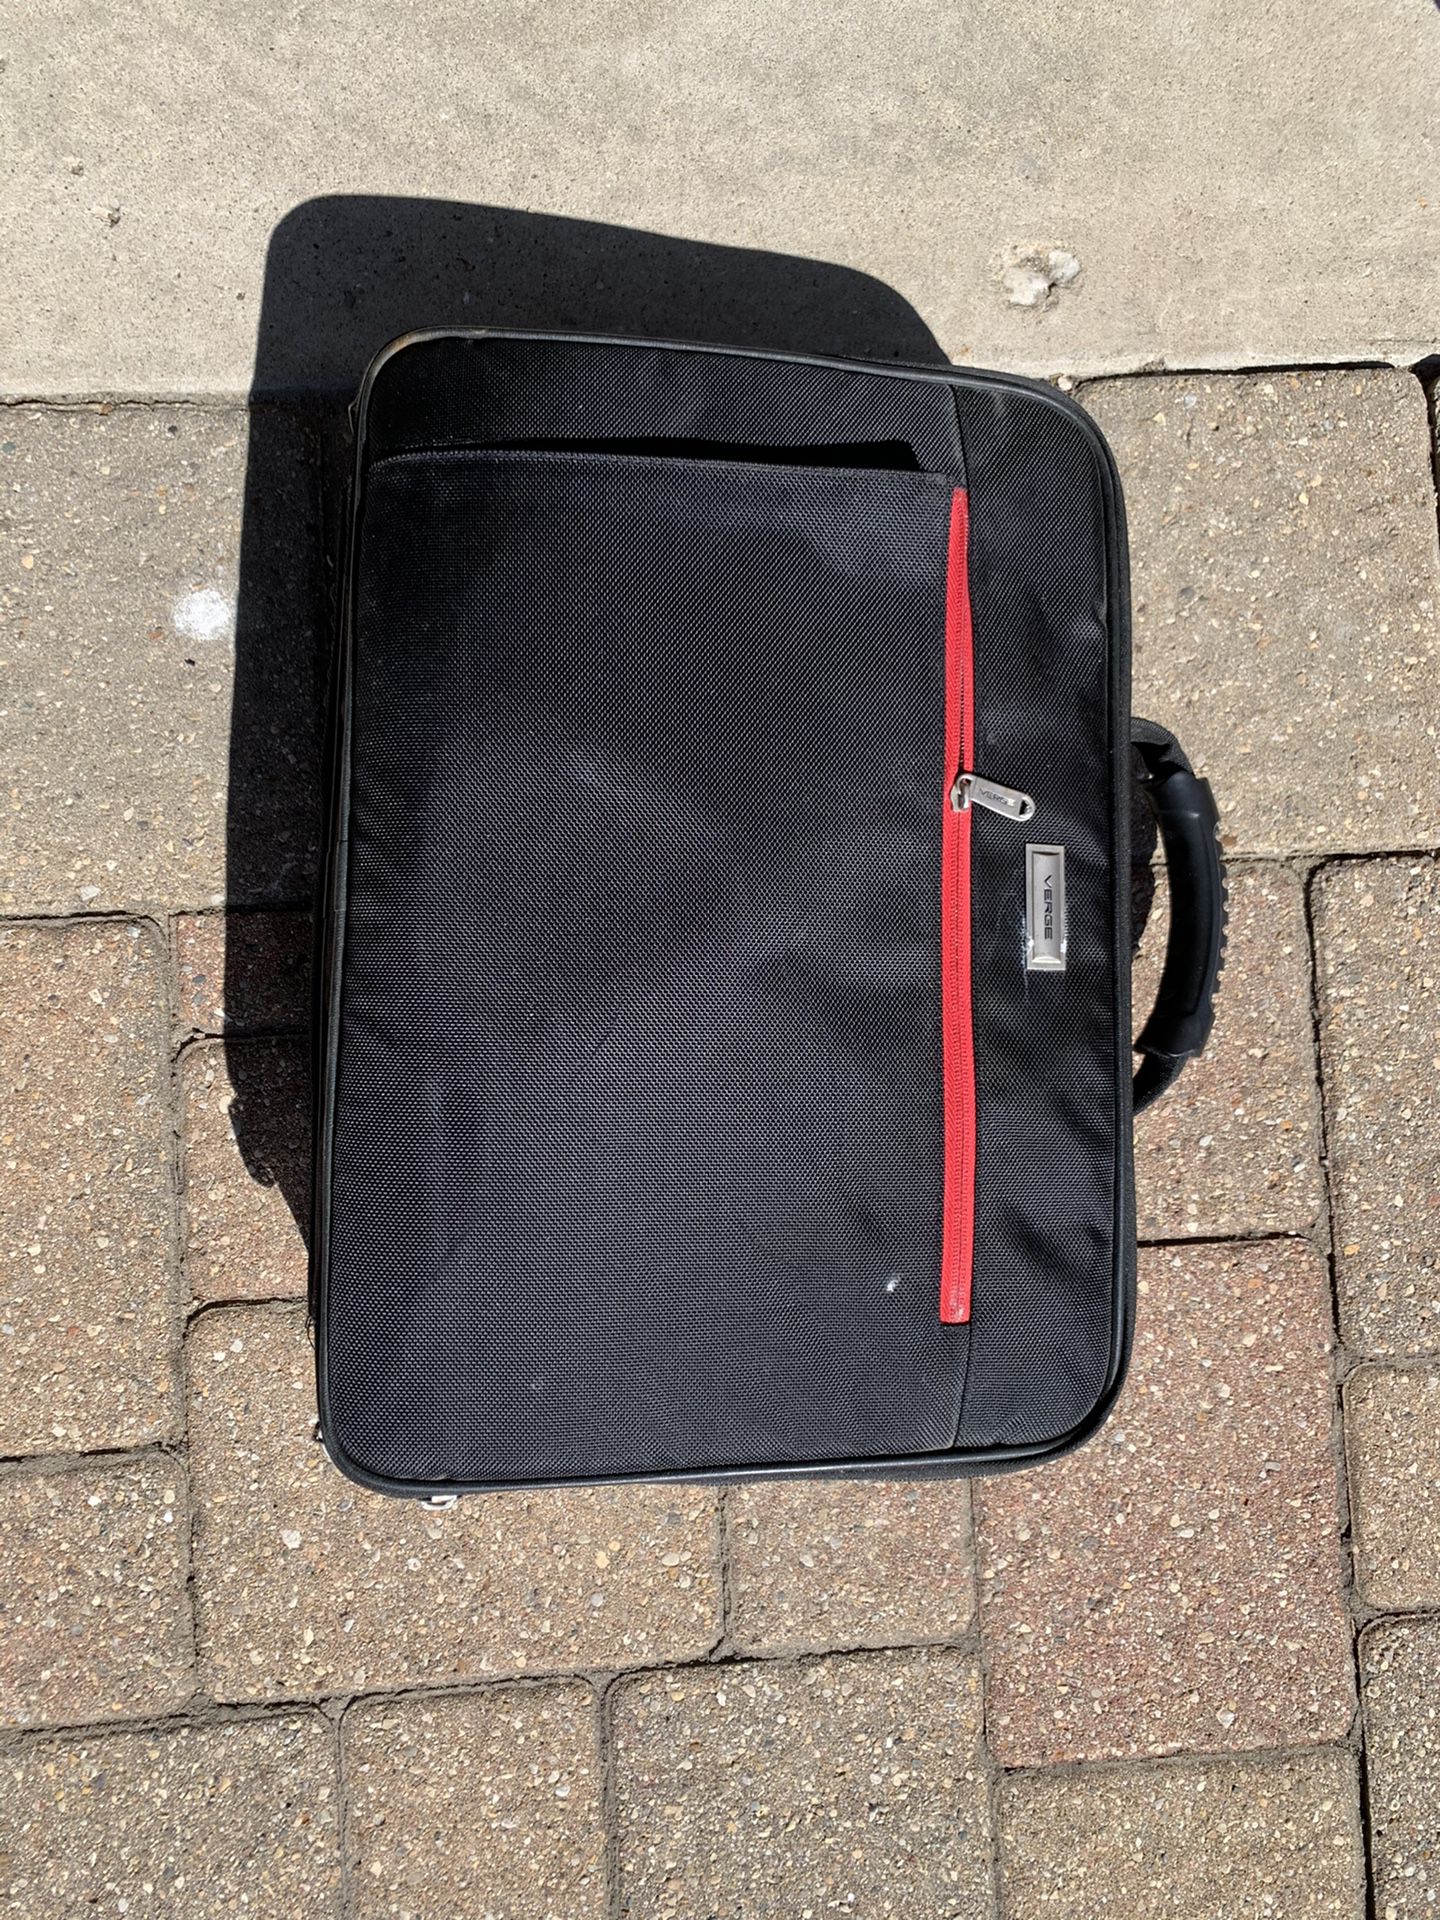 Franklin Covey Rolling Laptop Bag - Red for Sale in Lombard, IL - OfferUp